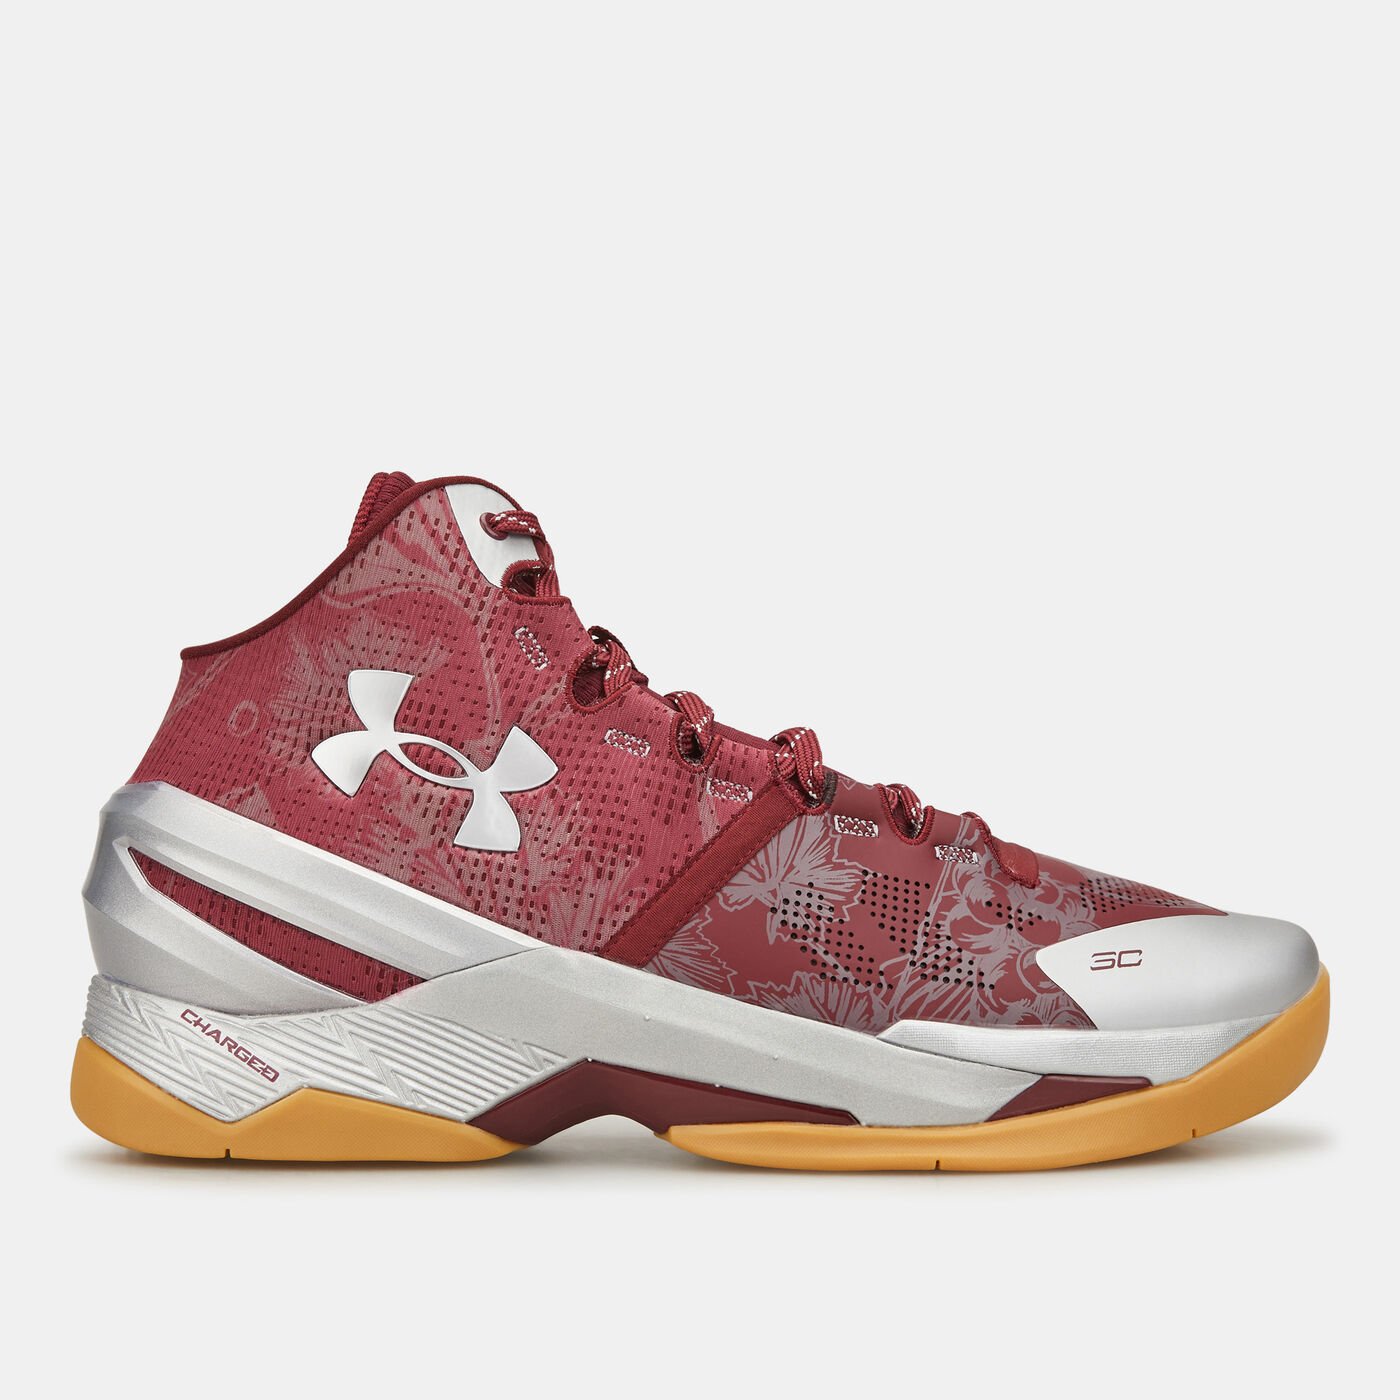 Curry 2 Basketball Shoes